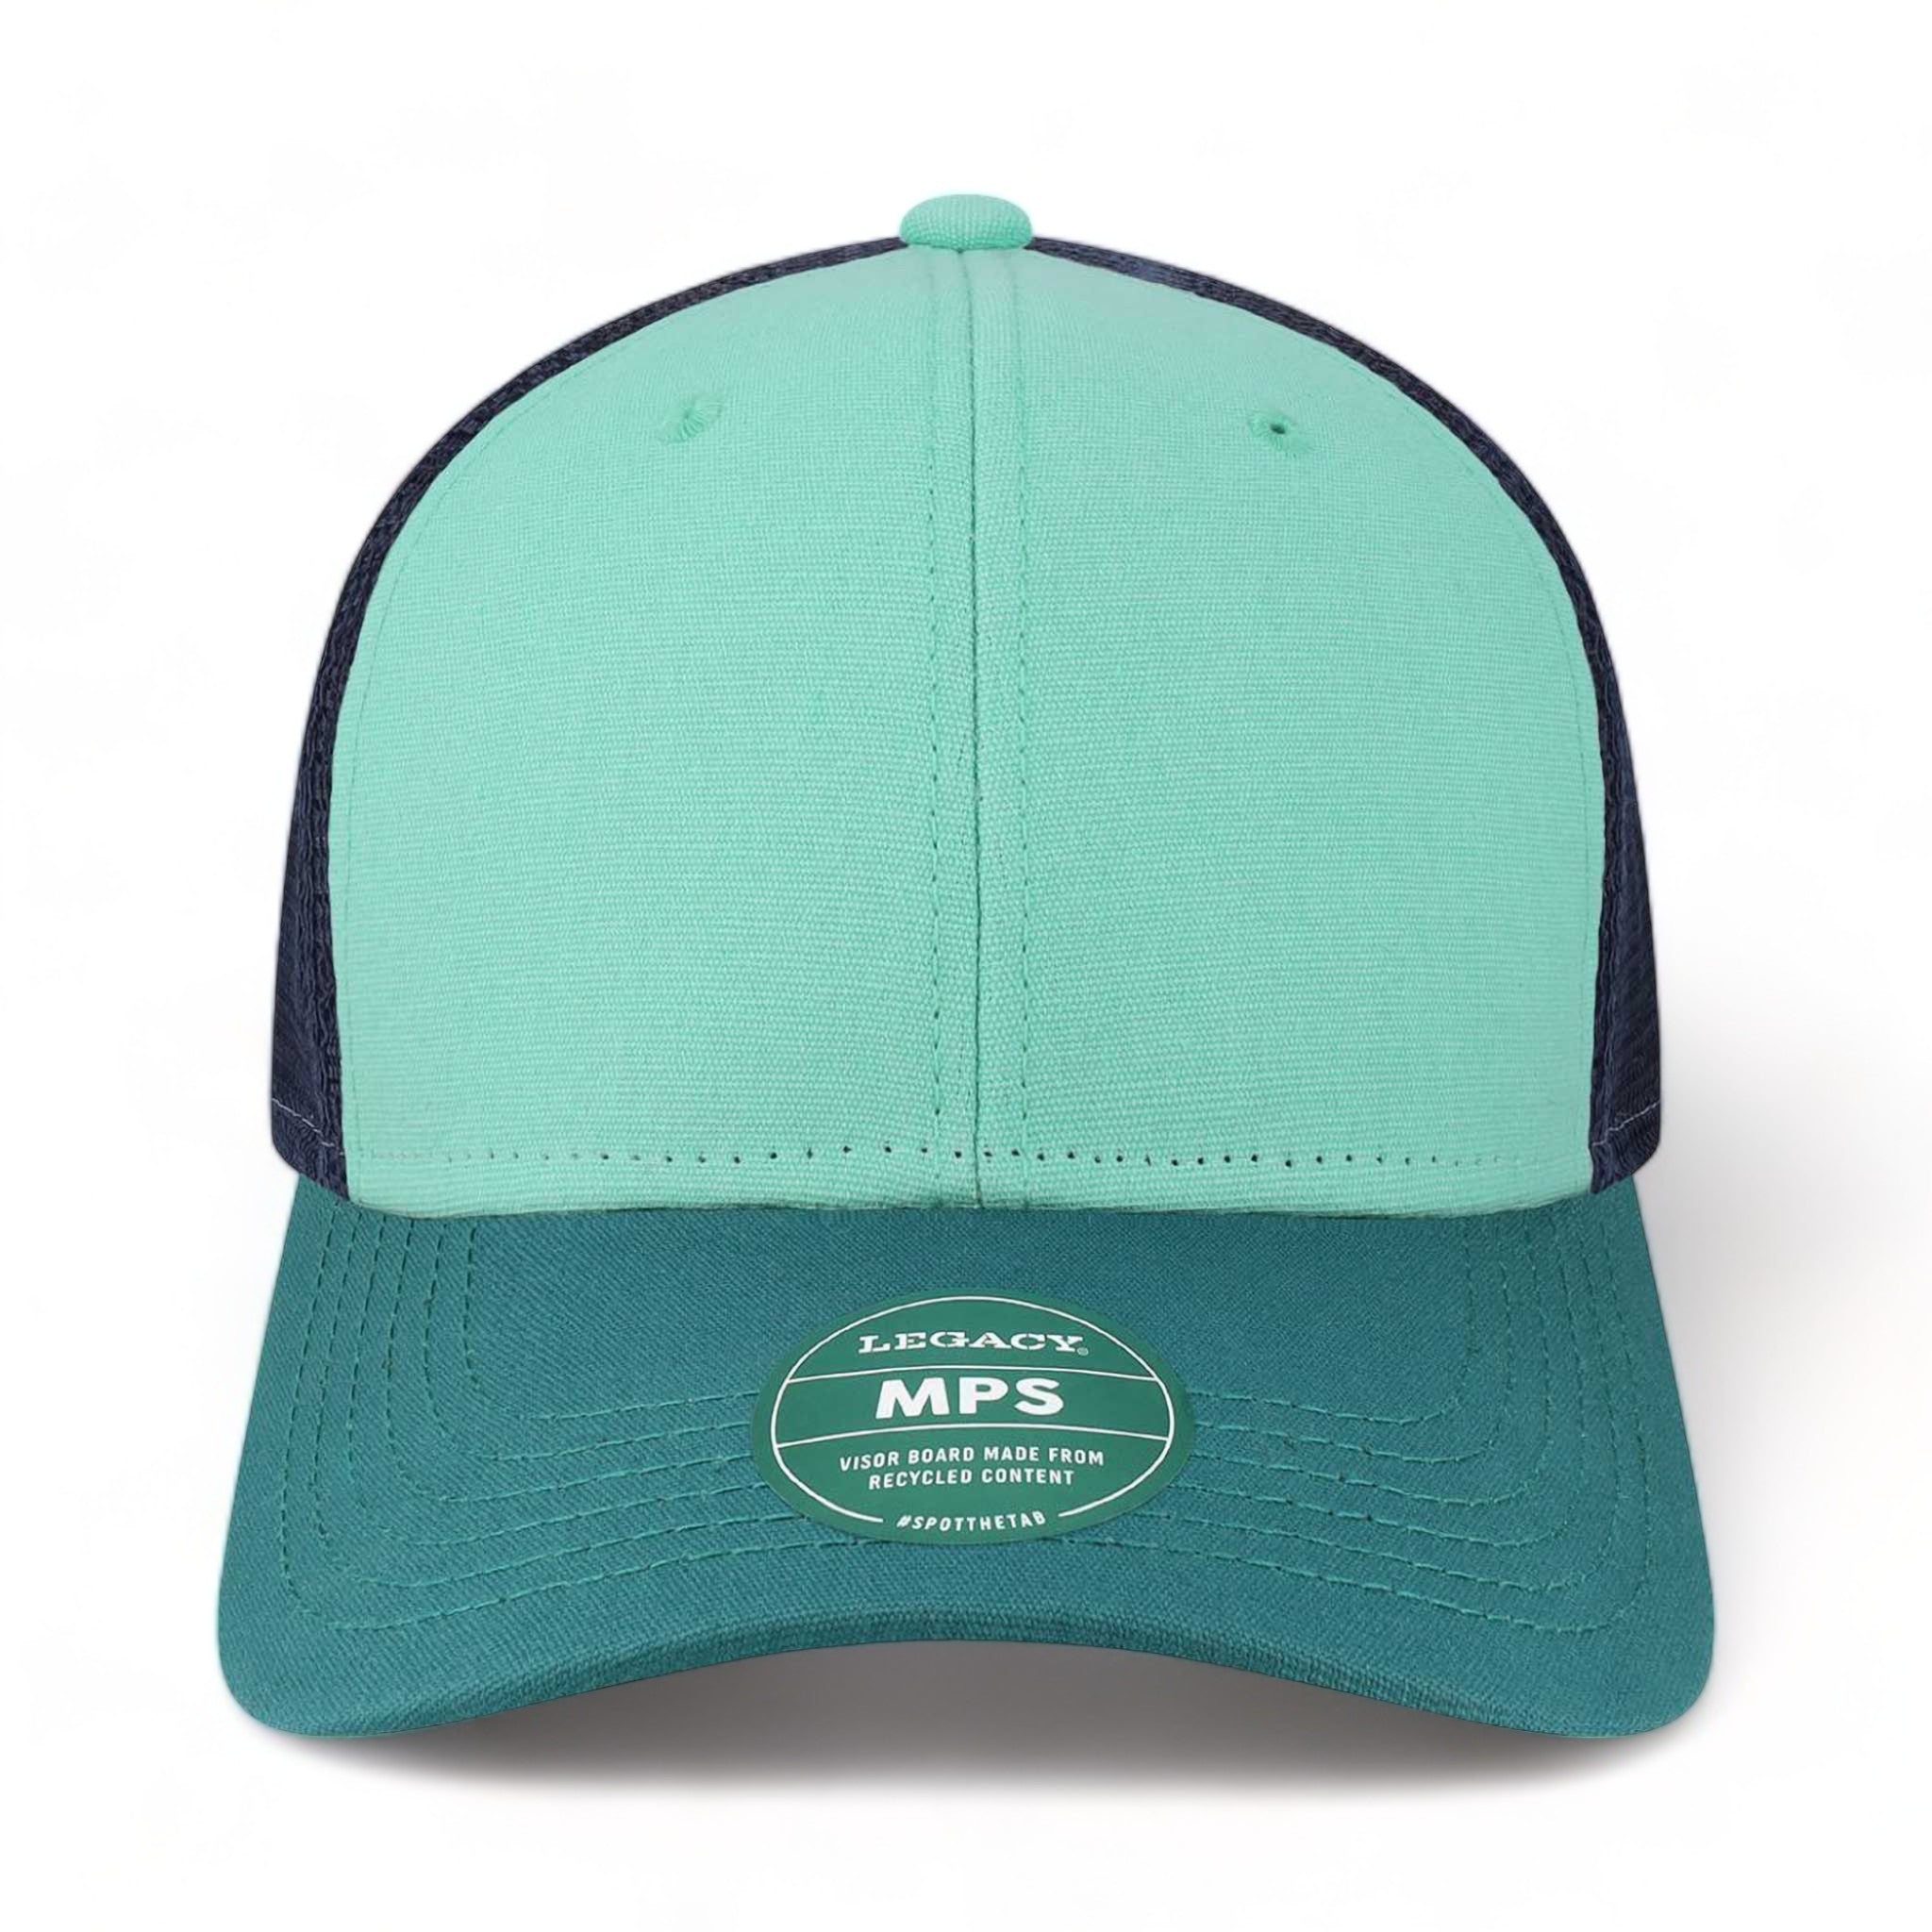 Front view of LEGACY MPS custom hat in mint, marine and navy